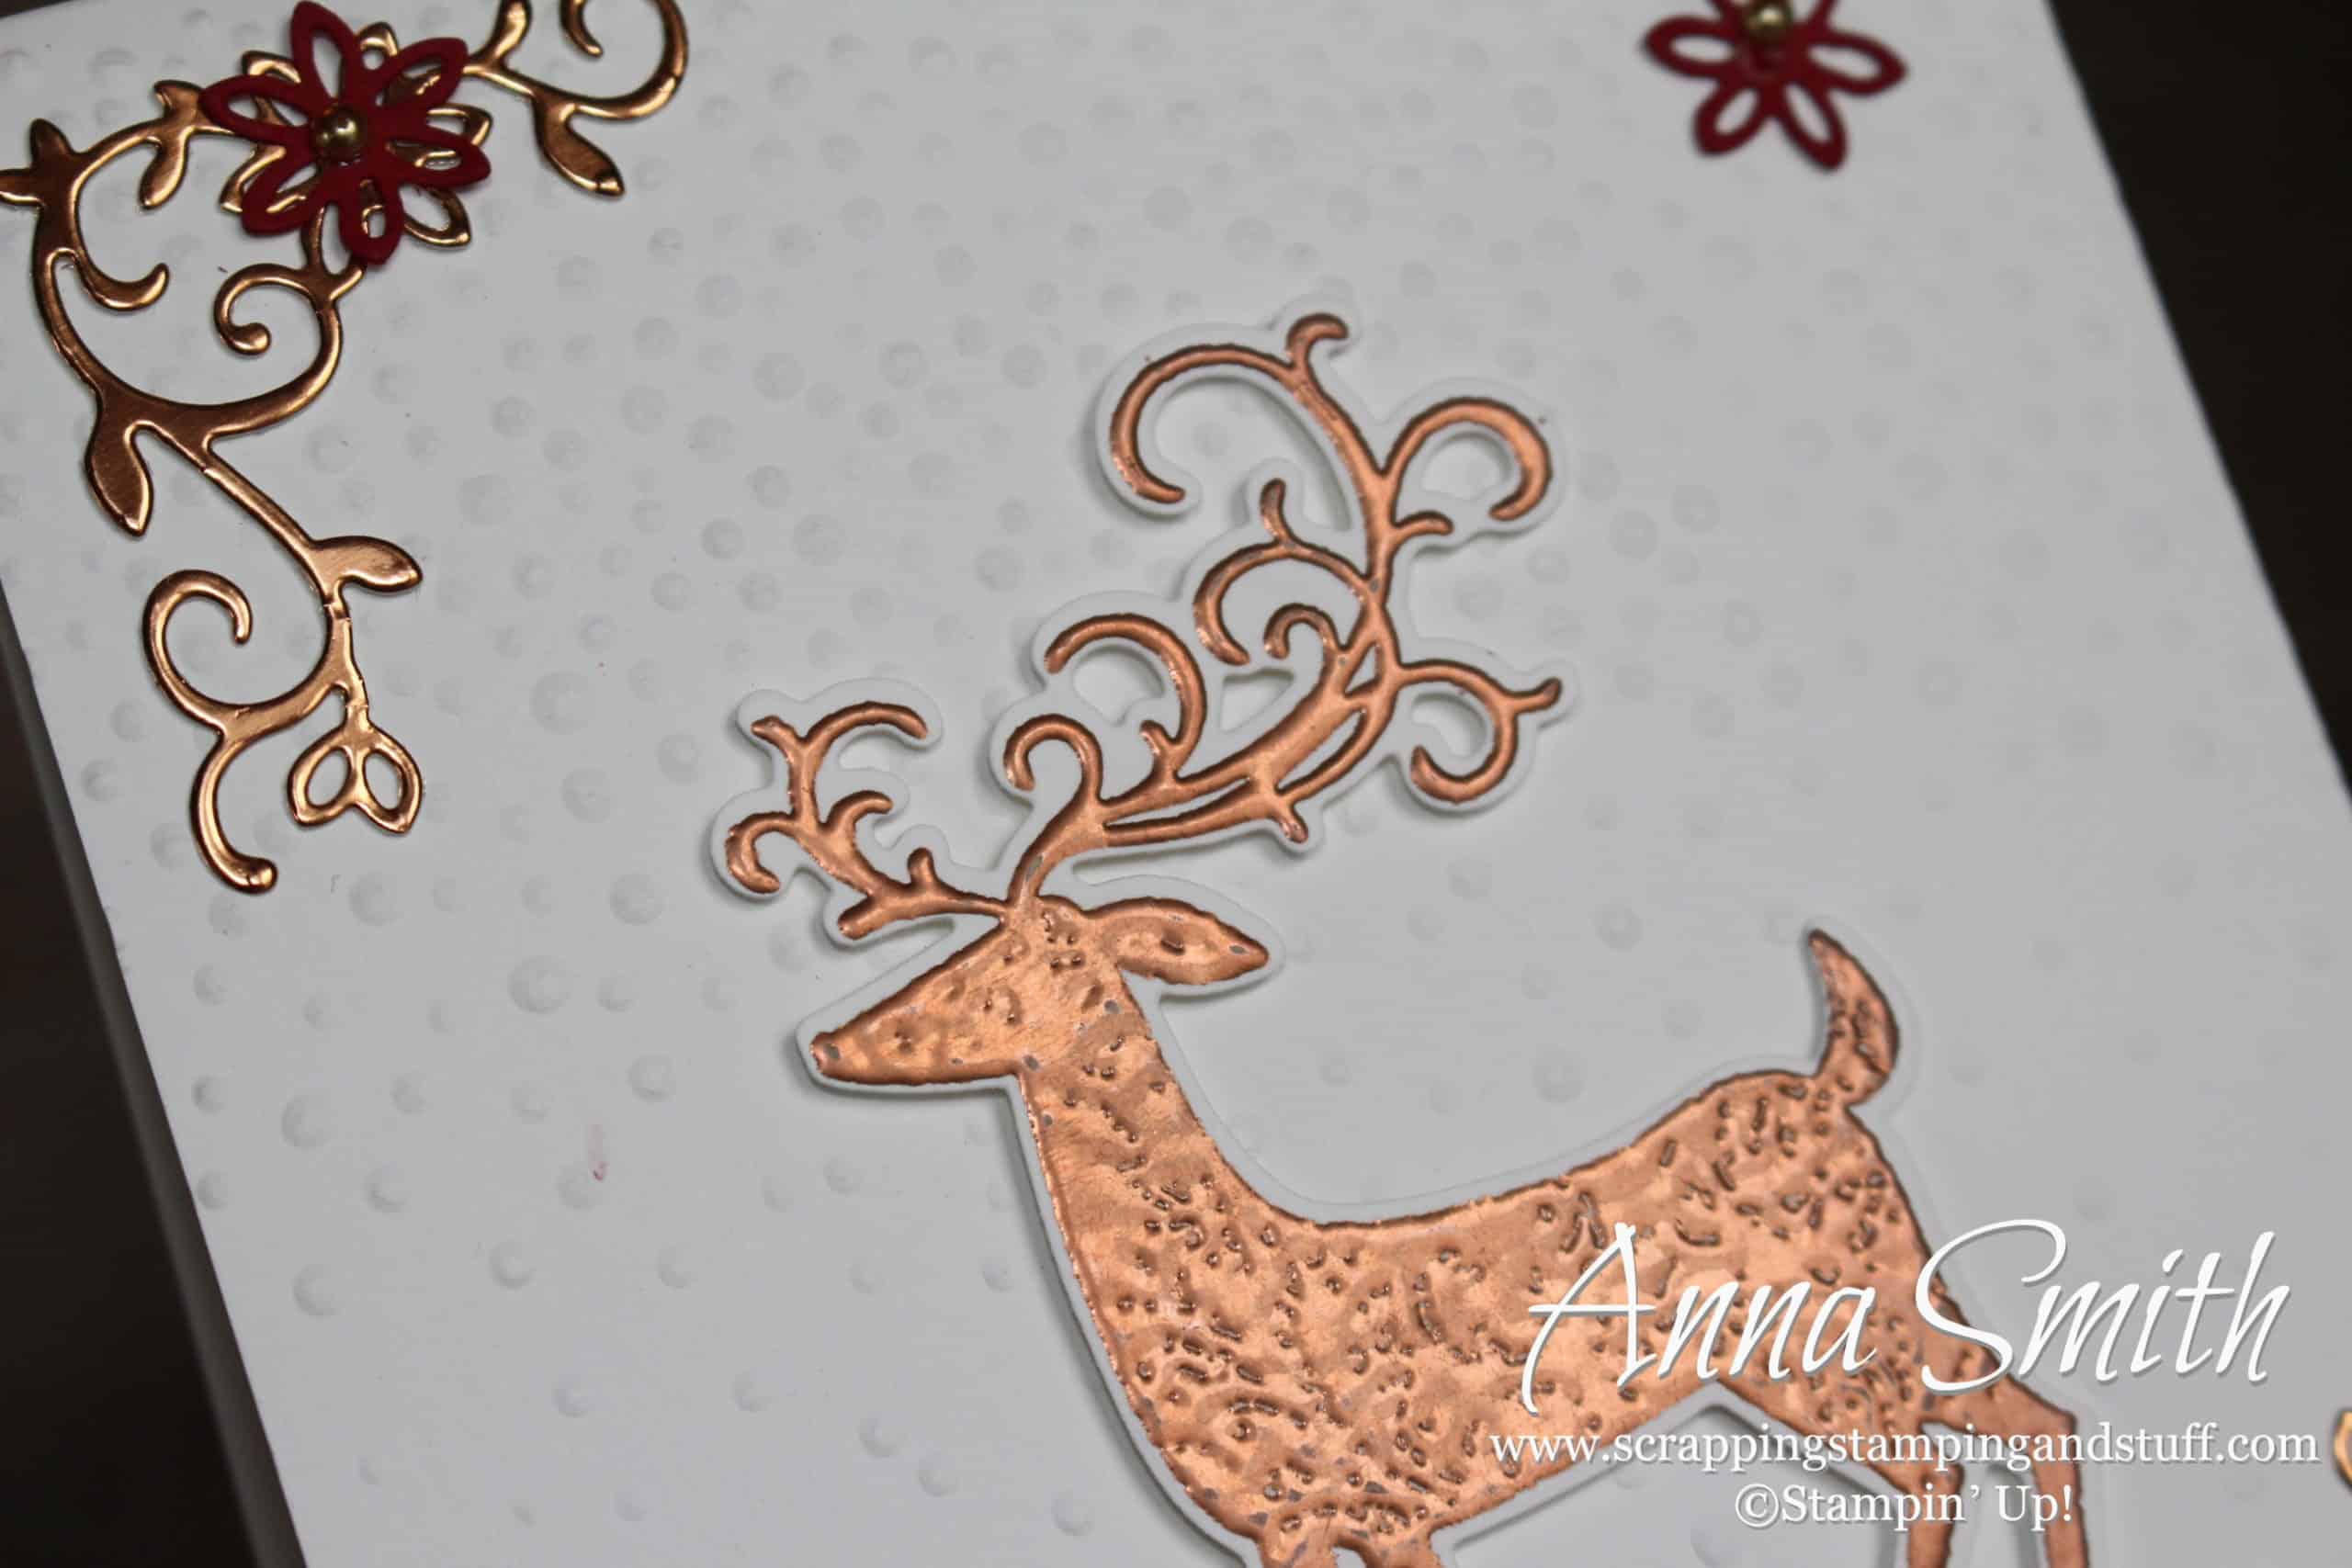 Merry Christmas with Stampin’ Up! Dashing Deer